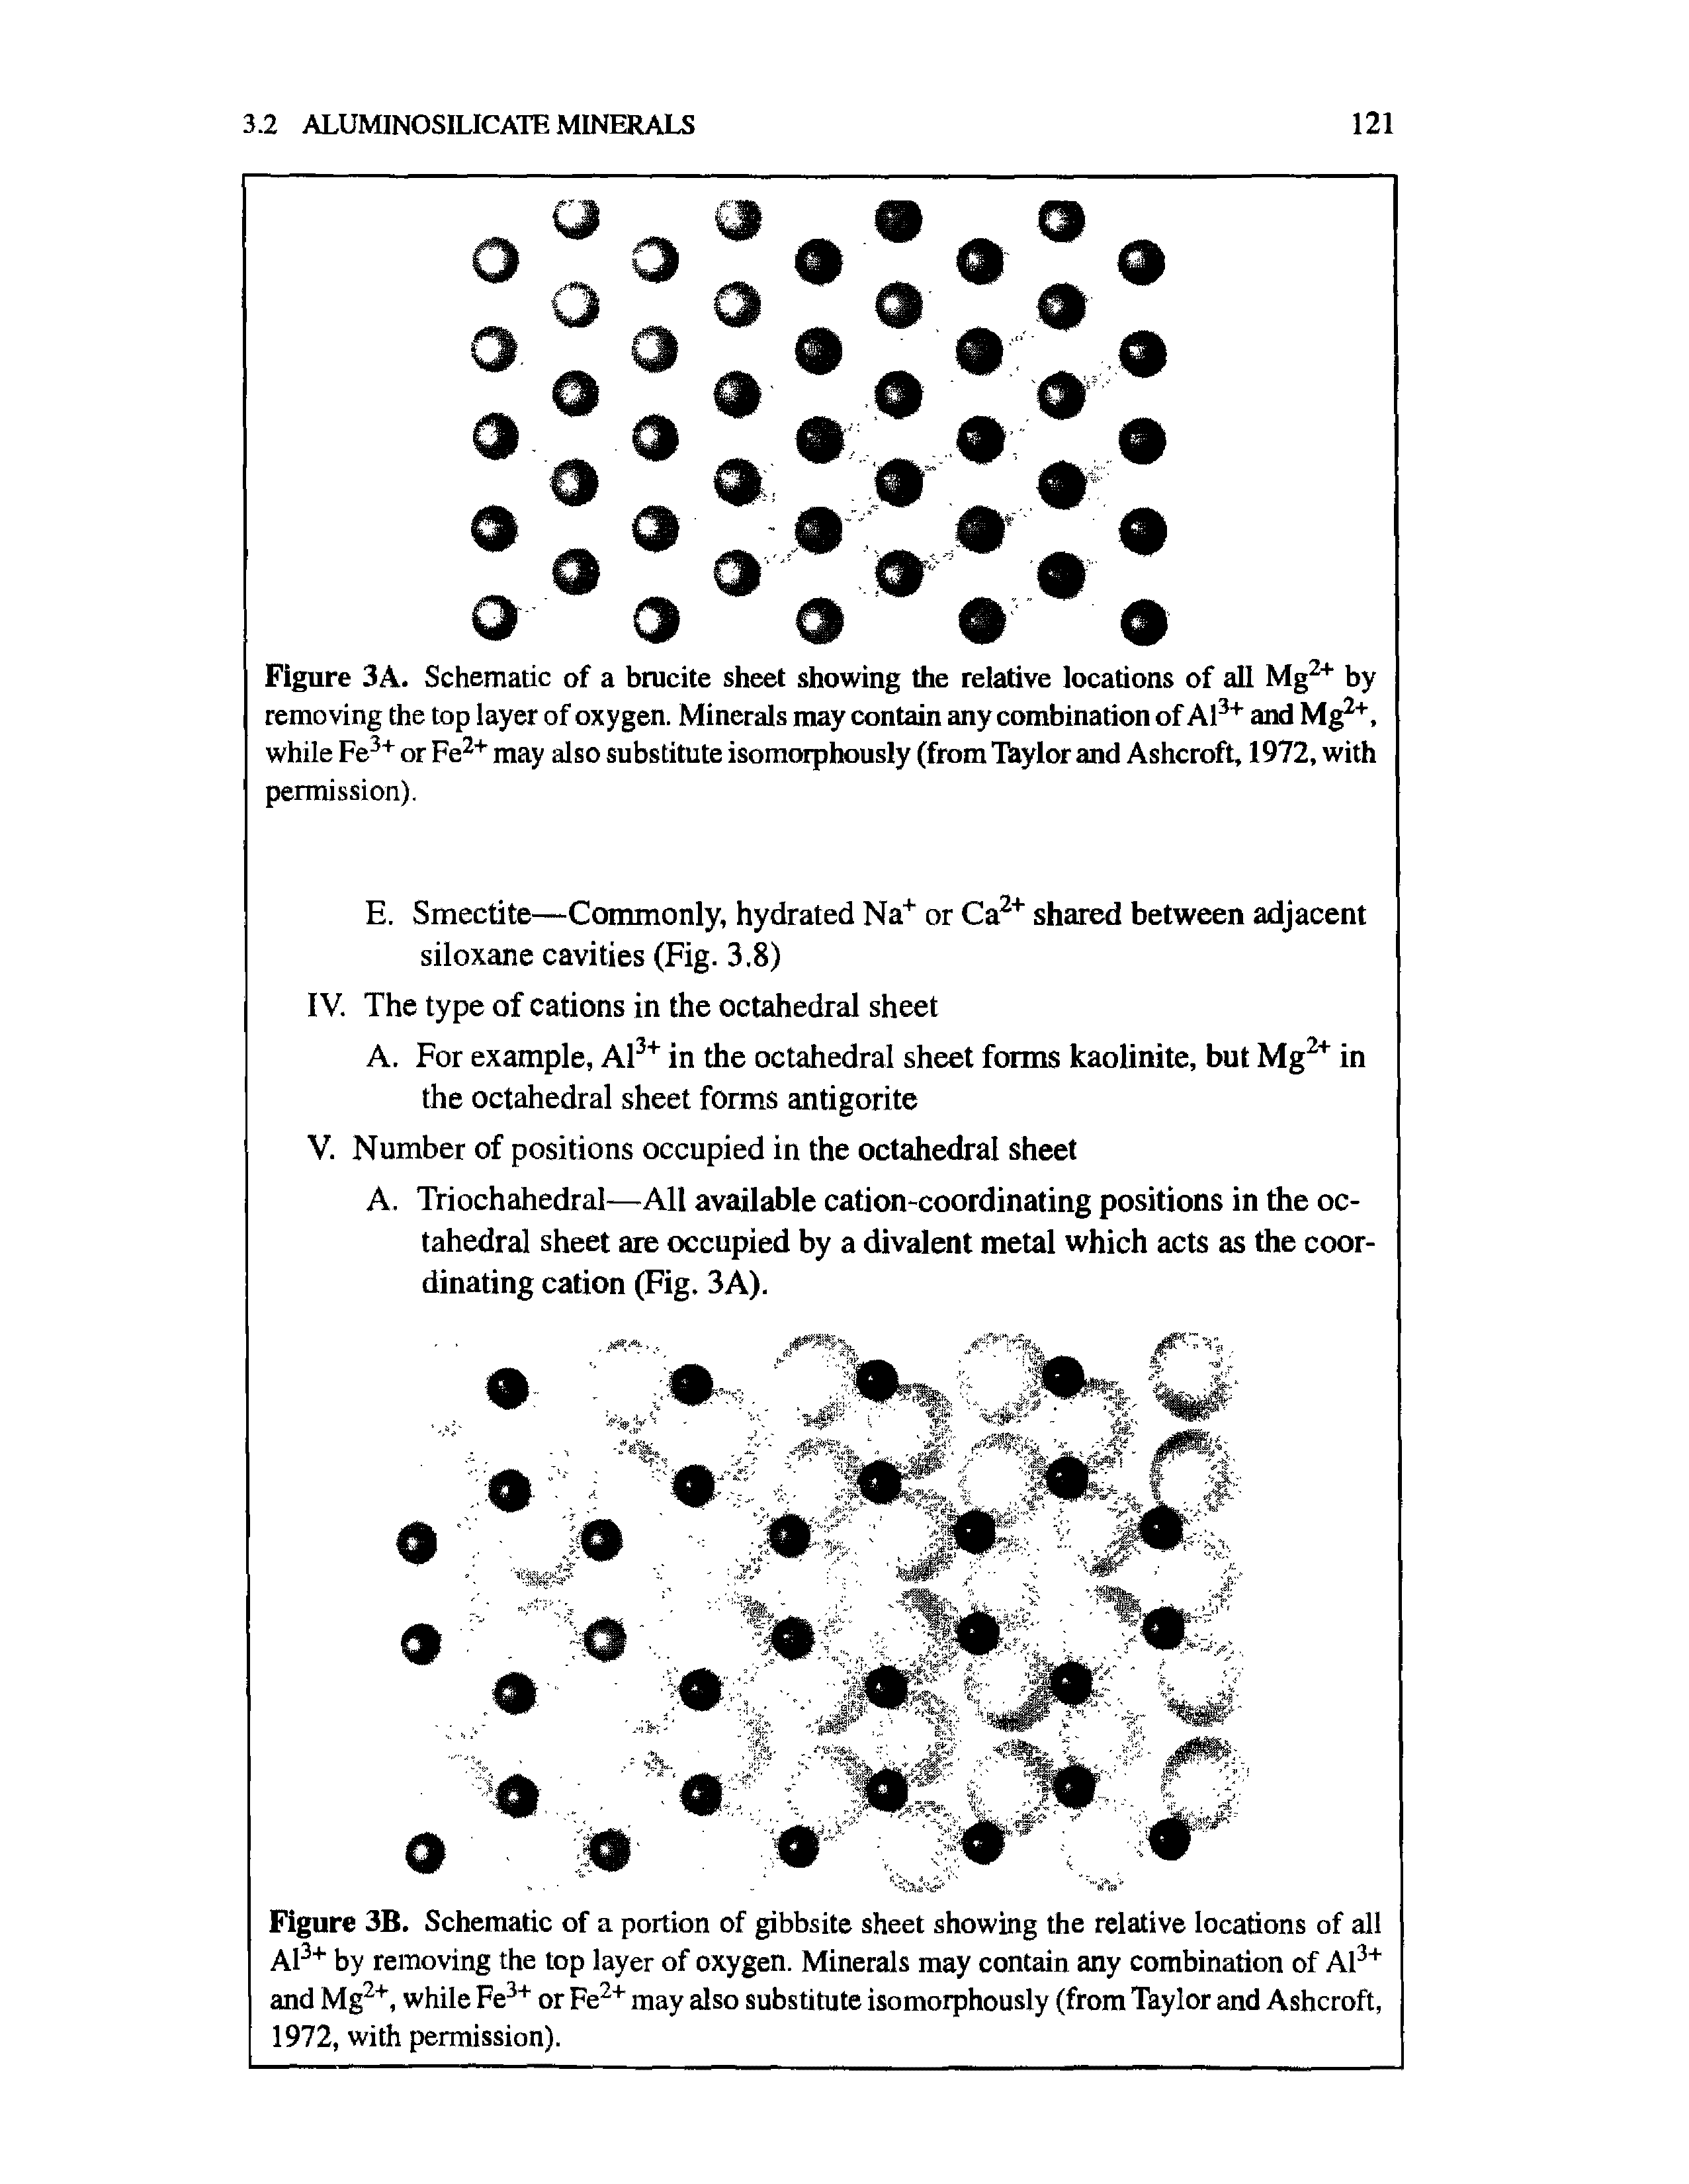 Figure 3A. Schematic of a brucite sheet showing the relative locations of all Mg2+ by removing the top layer of oxygen. Minerals may contain any combination of Al3+ and Mg2+, while Fe3+ or Fe2+ may also substitute isomorphously (from Taylor and Ashcroft, 1972, with...